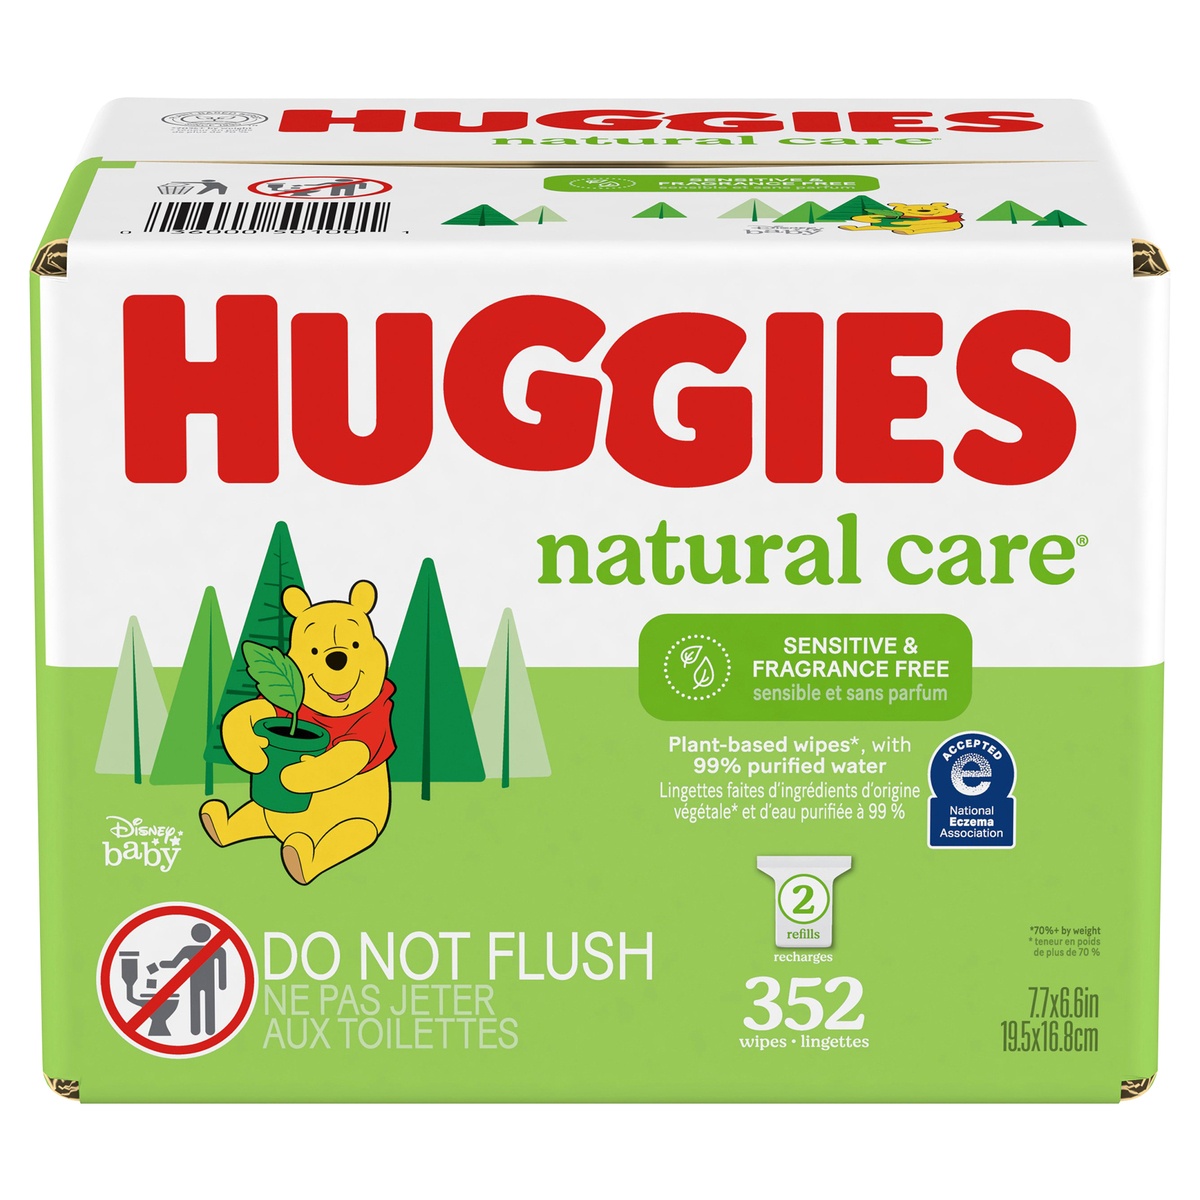 slide 10 of 10, Huggies Natural Care Unscented Baby Wipes, Sensitive, 2 Refill Packs, 352 ct